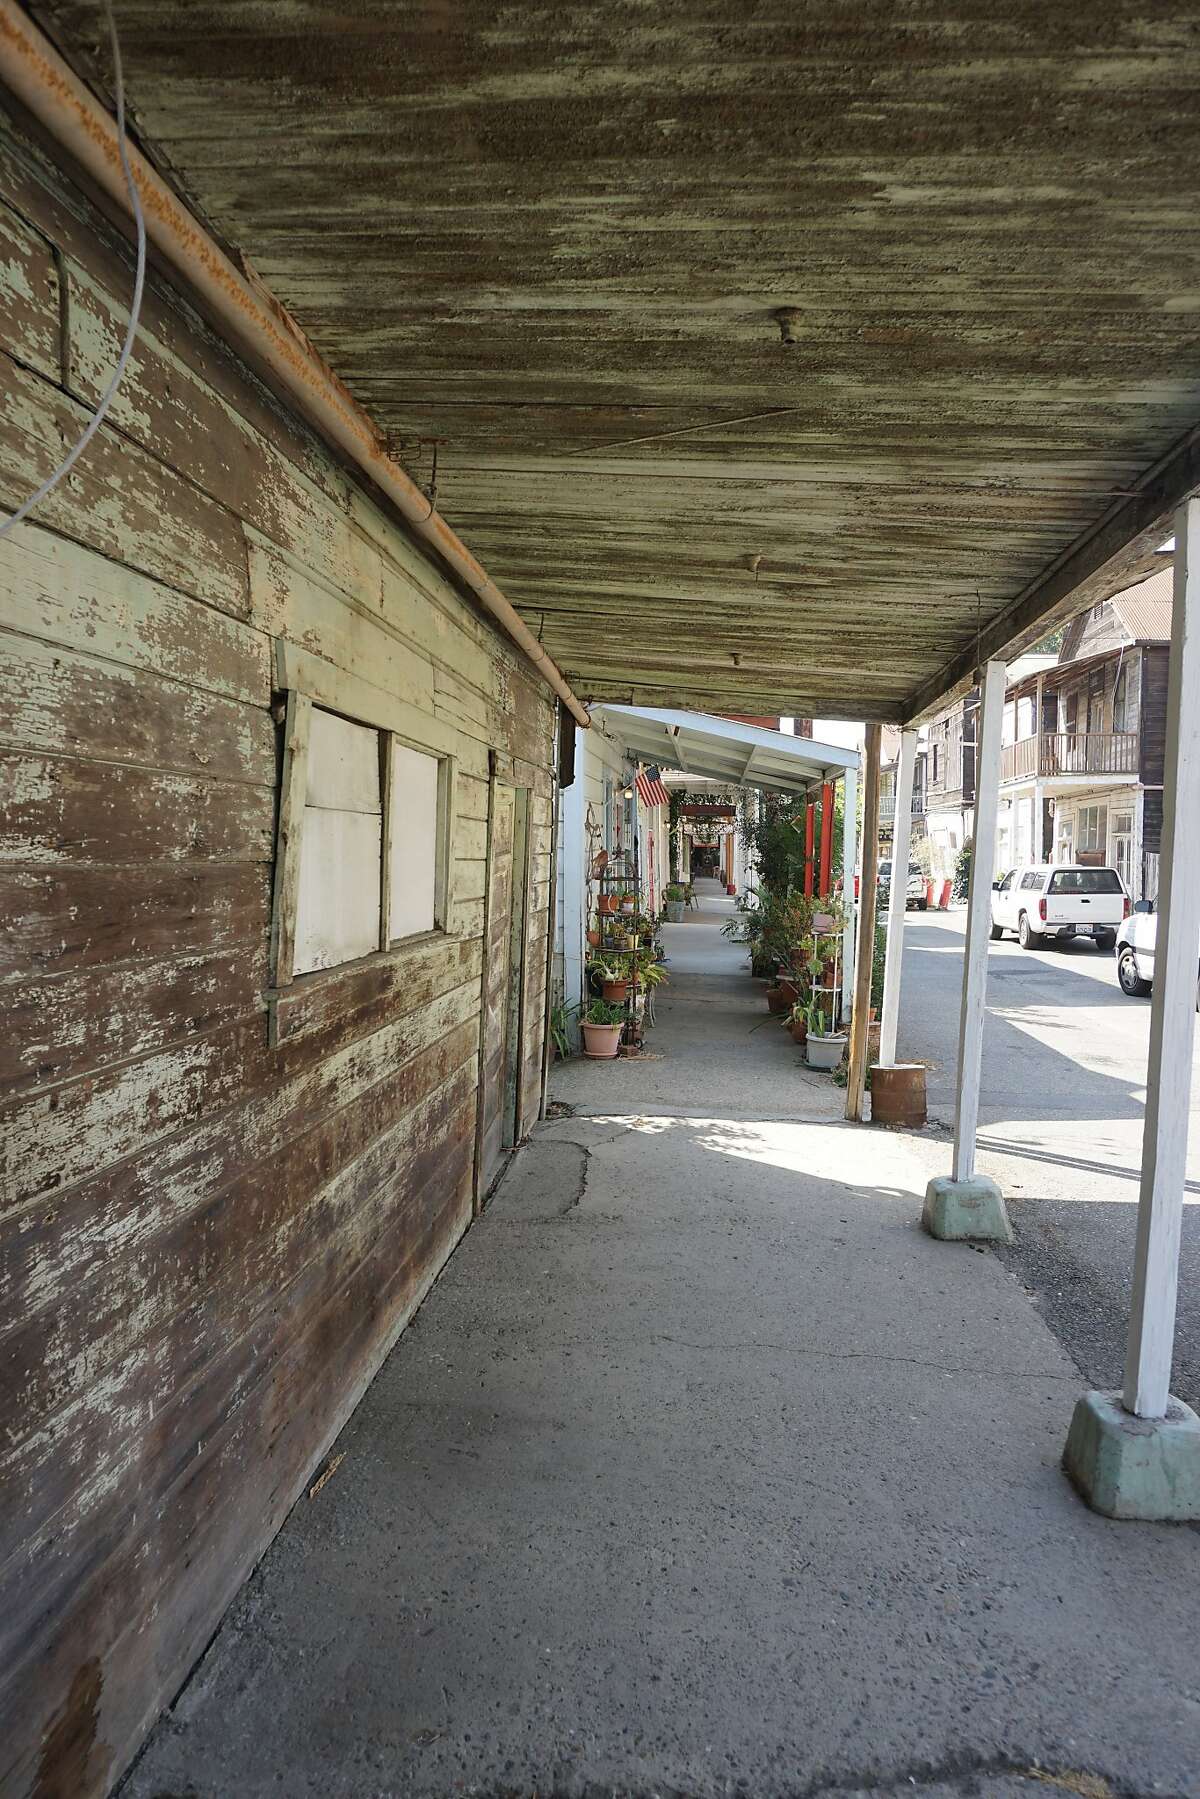 Rustic streets and storefronts in the historical Chinese enclave of Locke near Walnut Grove.